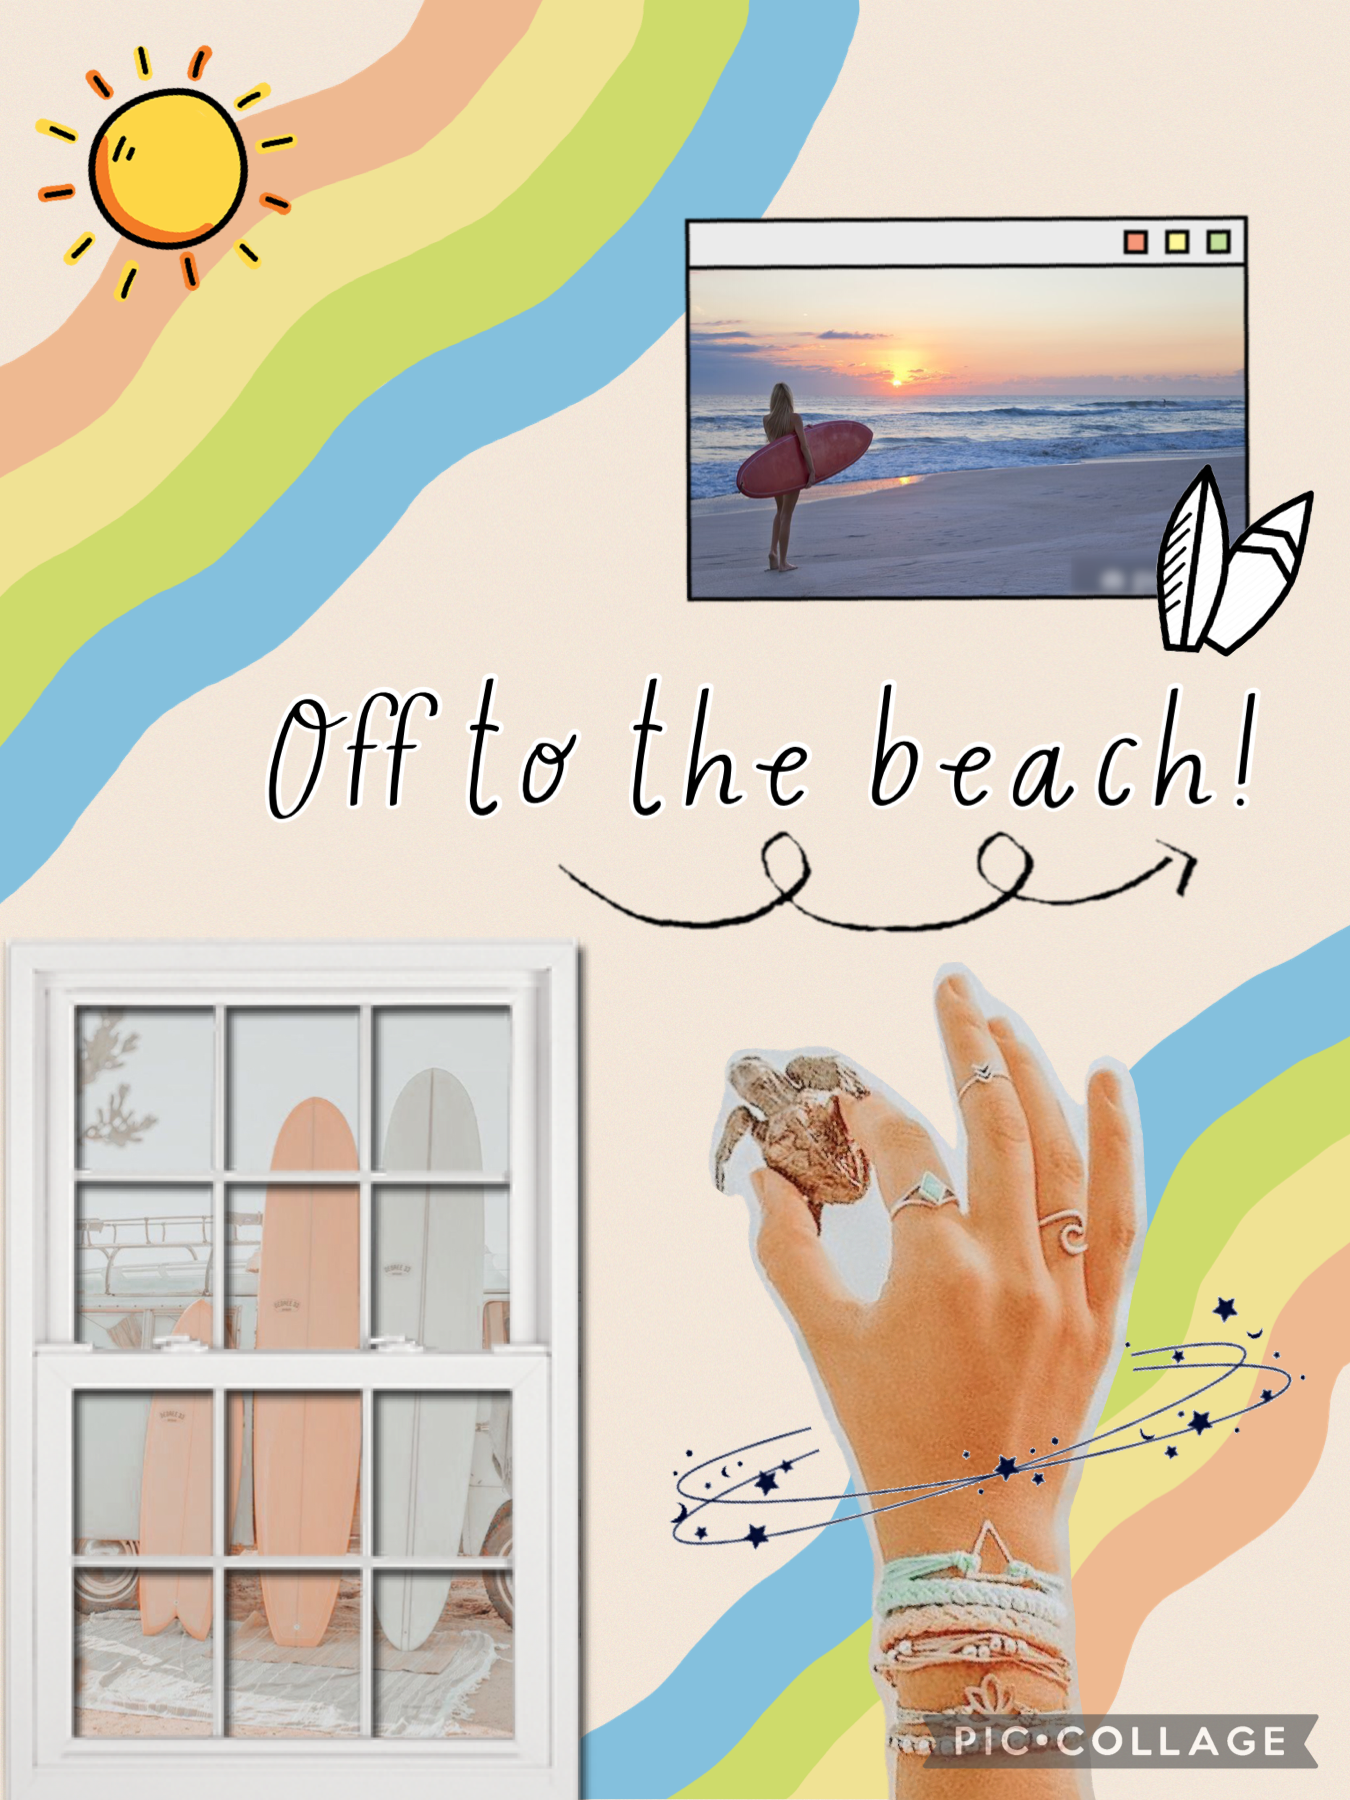 Tap Me!!
This collage is about the beach because the beach is my favourite place :) Hope you like it!